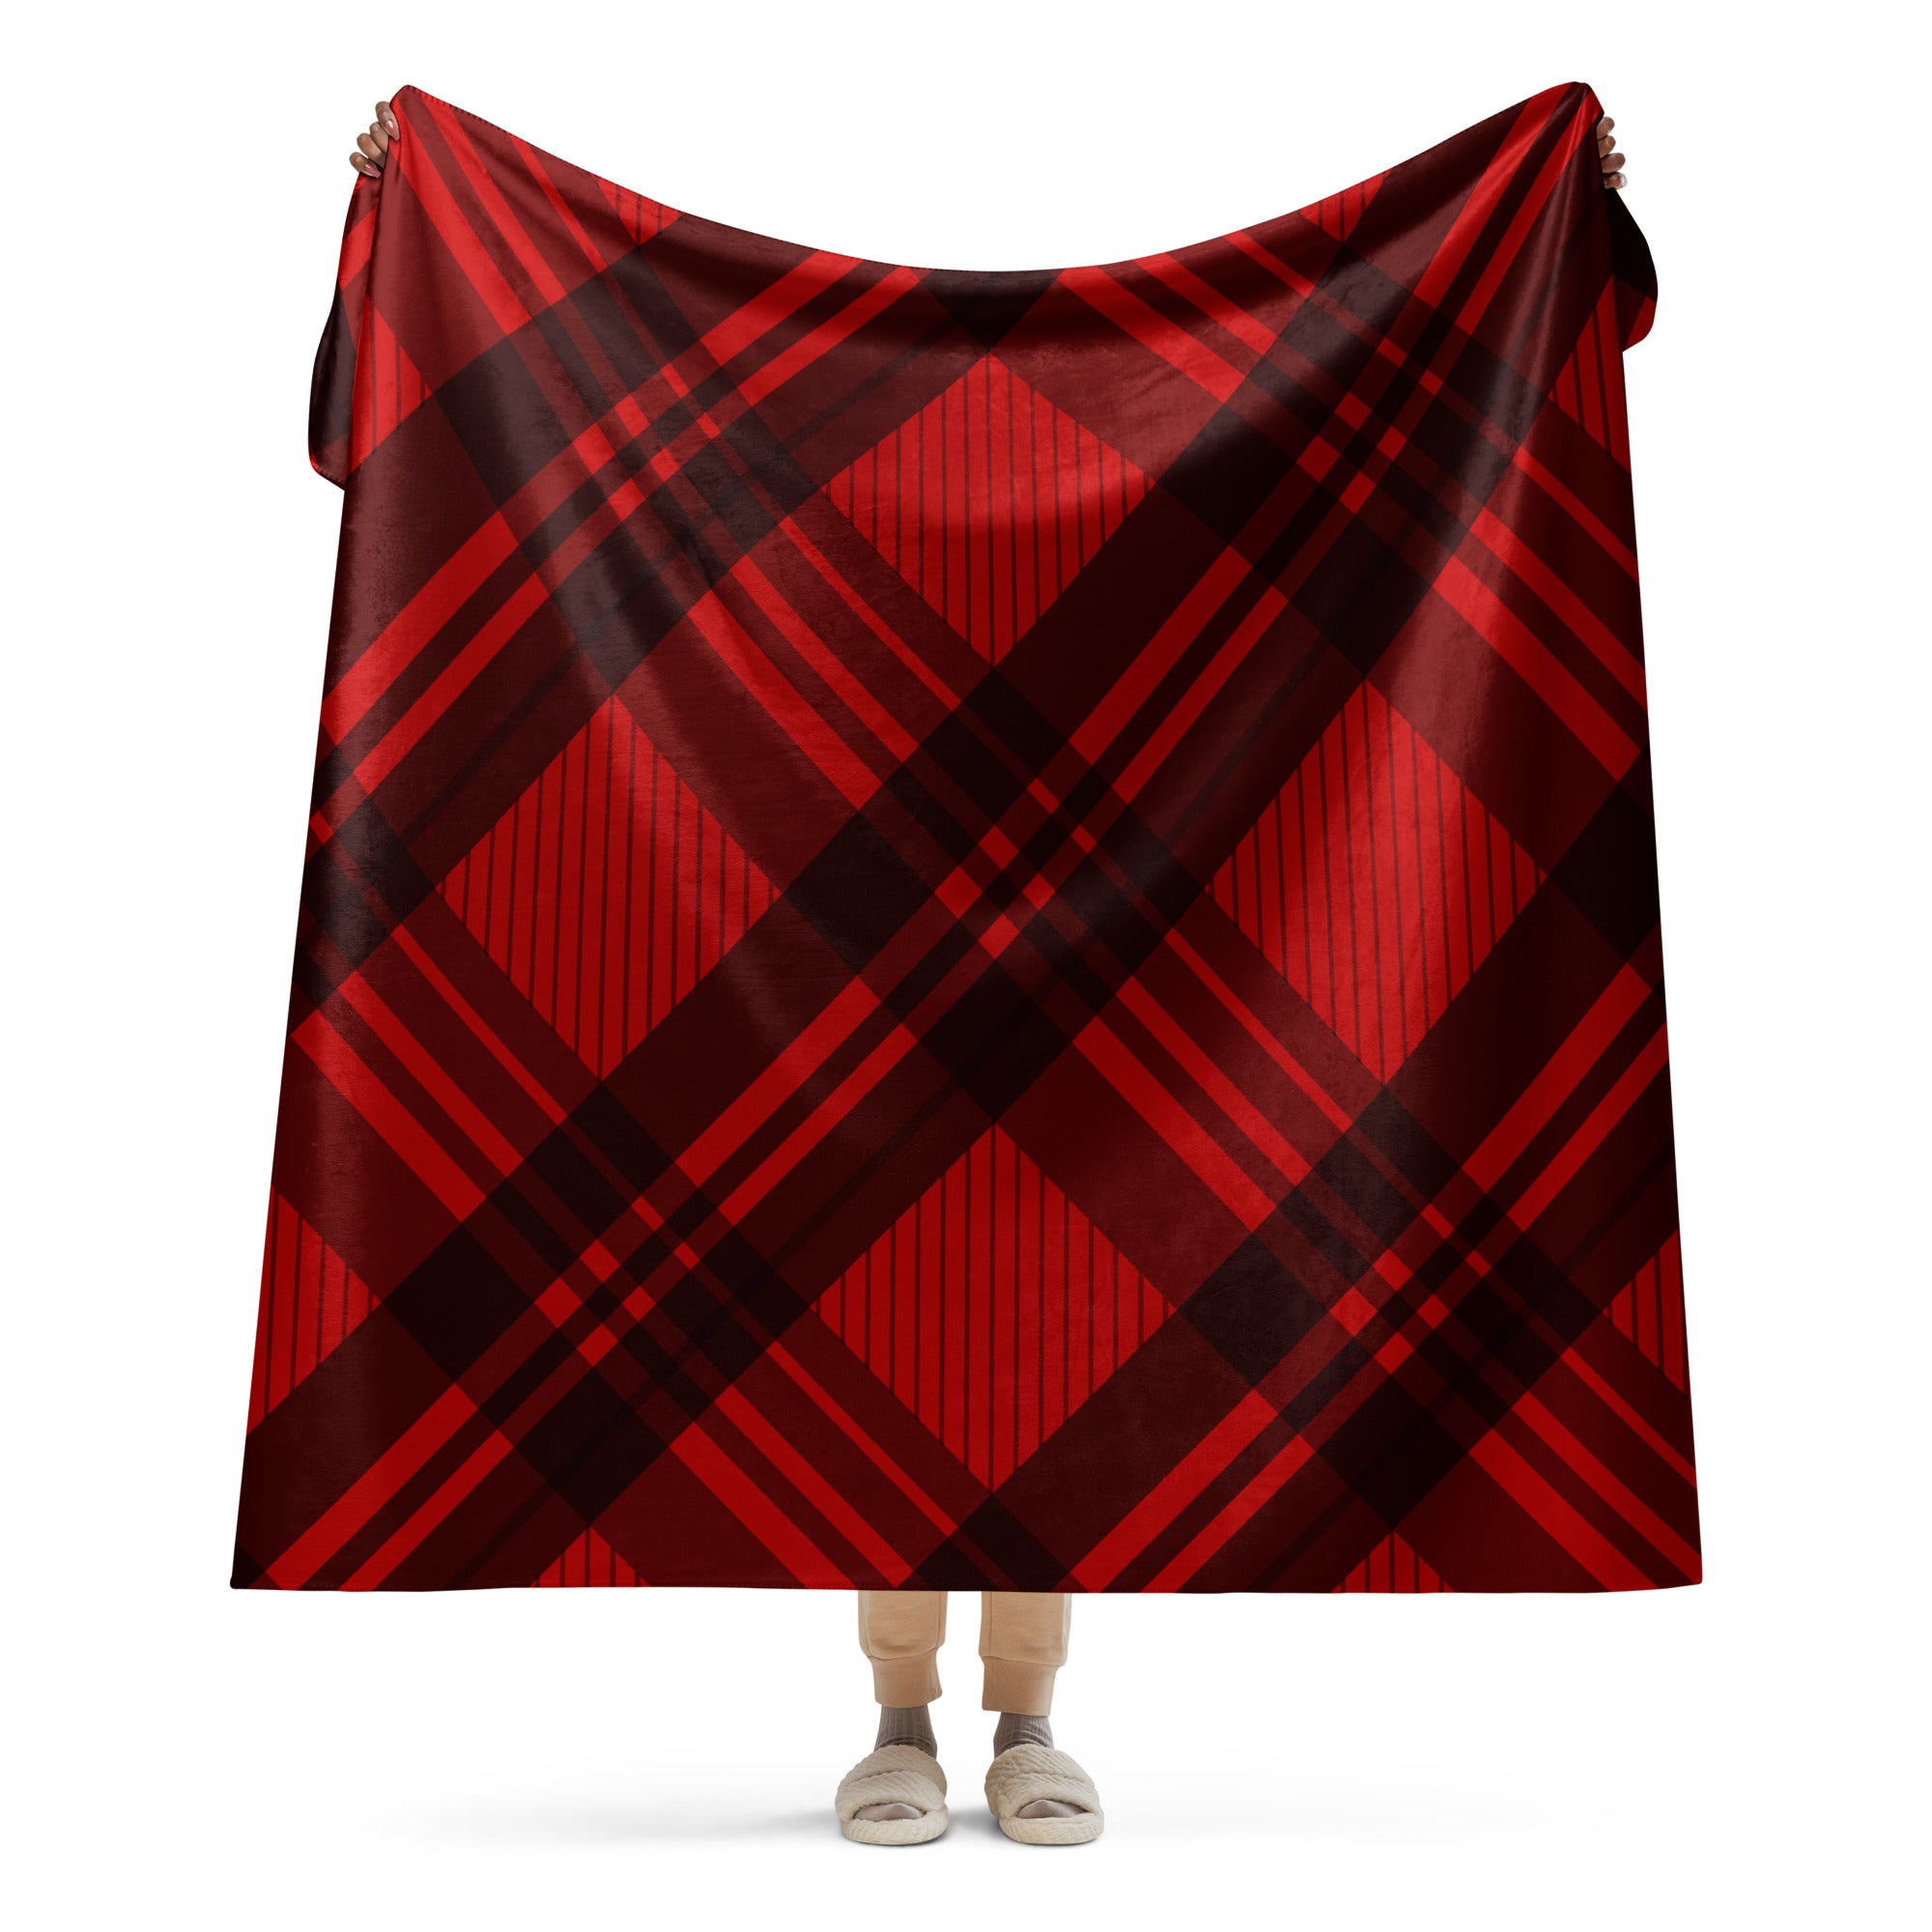 Plaid Red and Black Sherpa blanket lioness-love